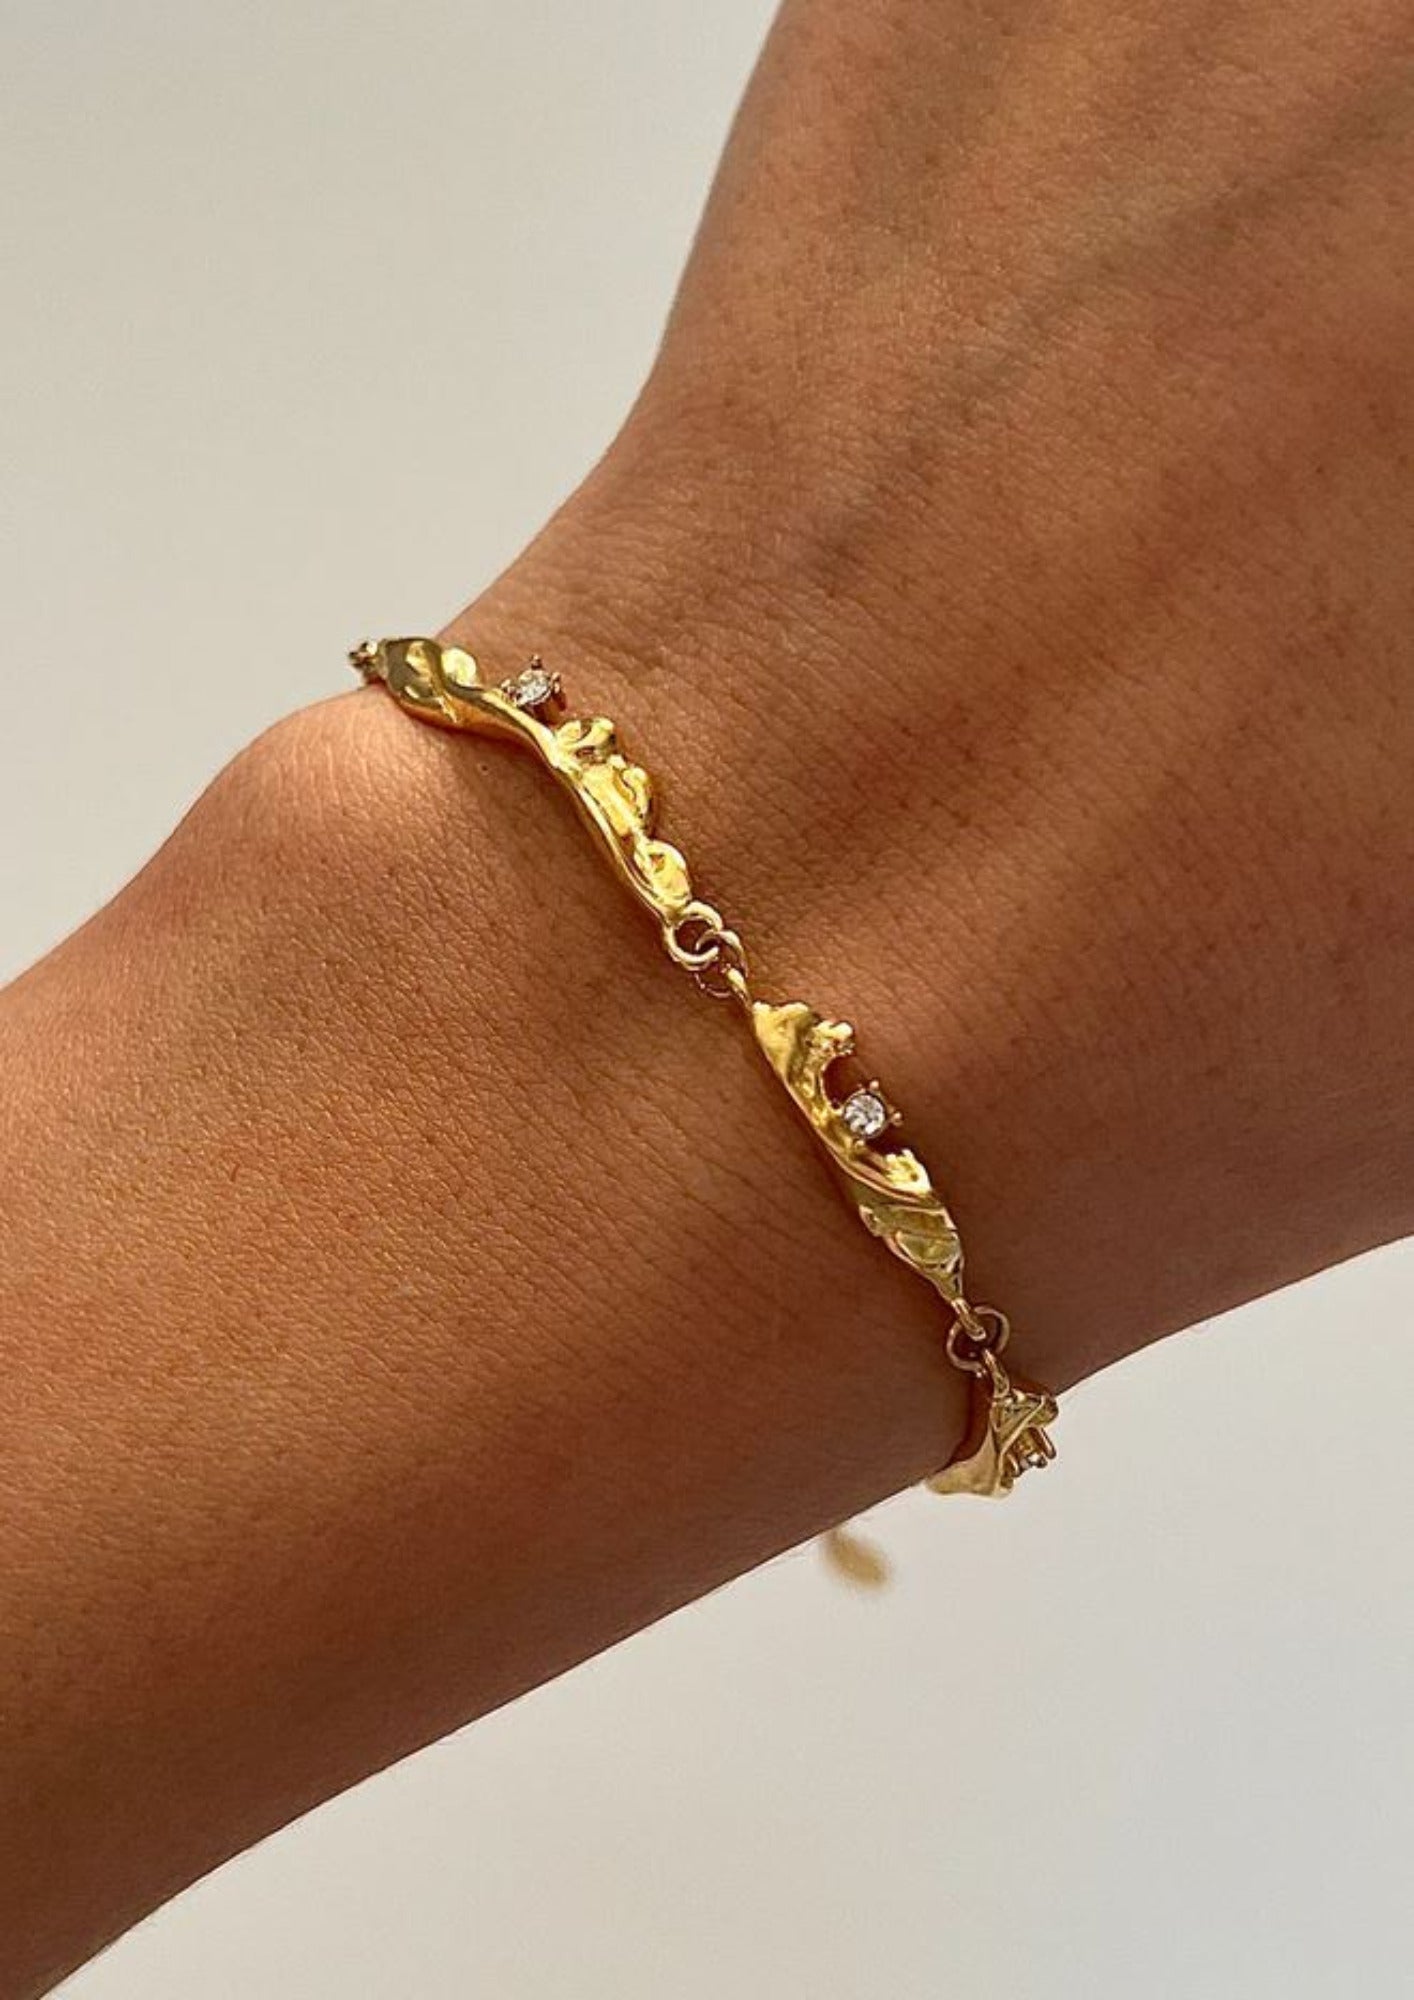 Geometric Shining Zircon Non-fading Bracelet For Girls braclet Yubama Jewelry Online Store - The Elegant Designs of Gold and Silver ! 